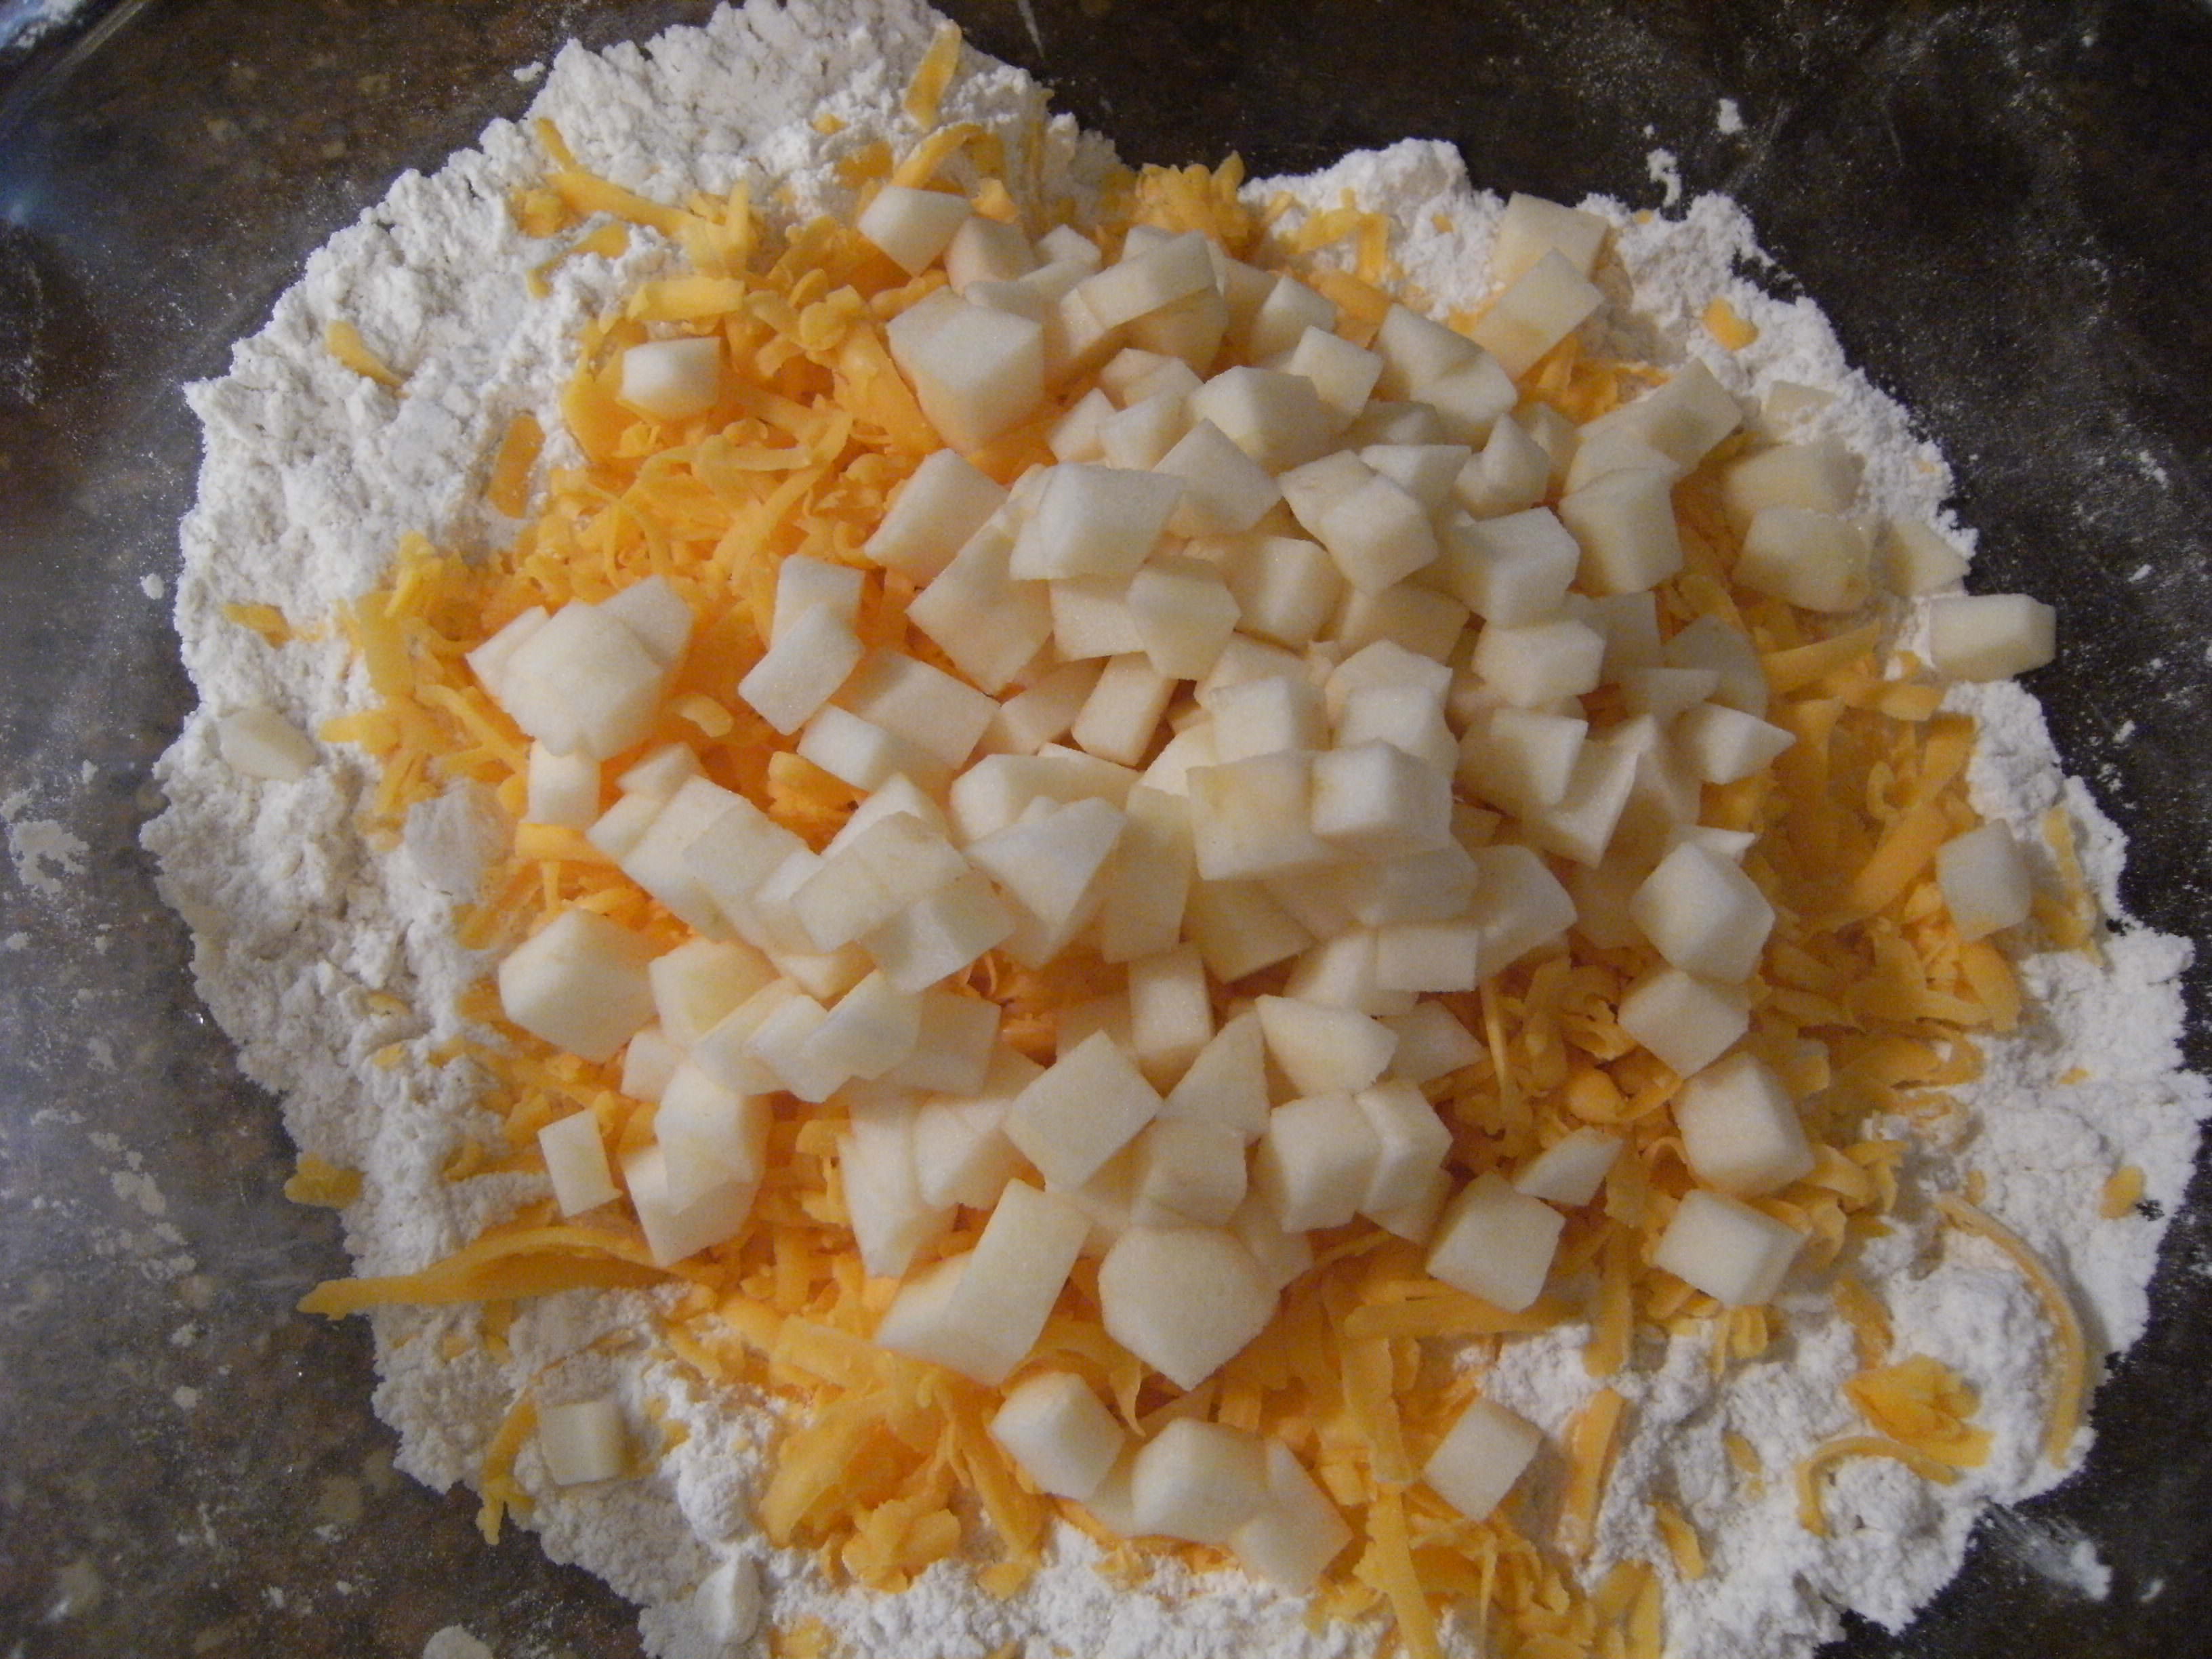 some of the ingredients needed to make cheddar-apple scones